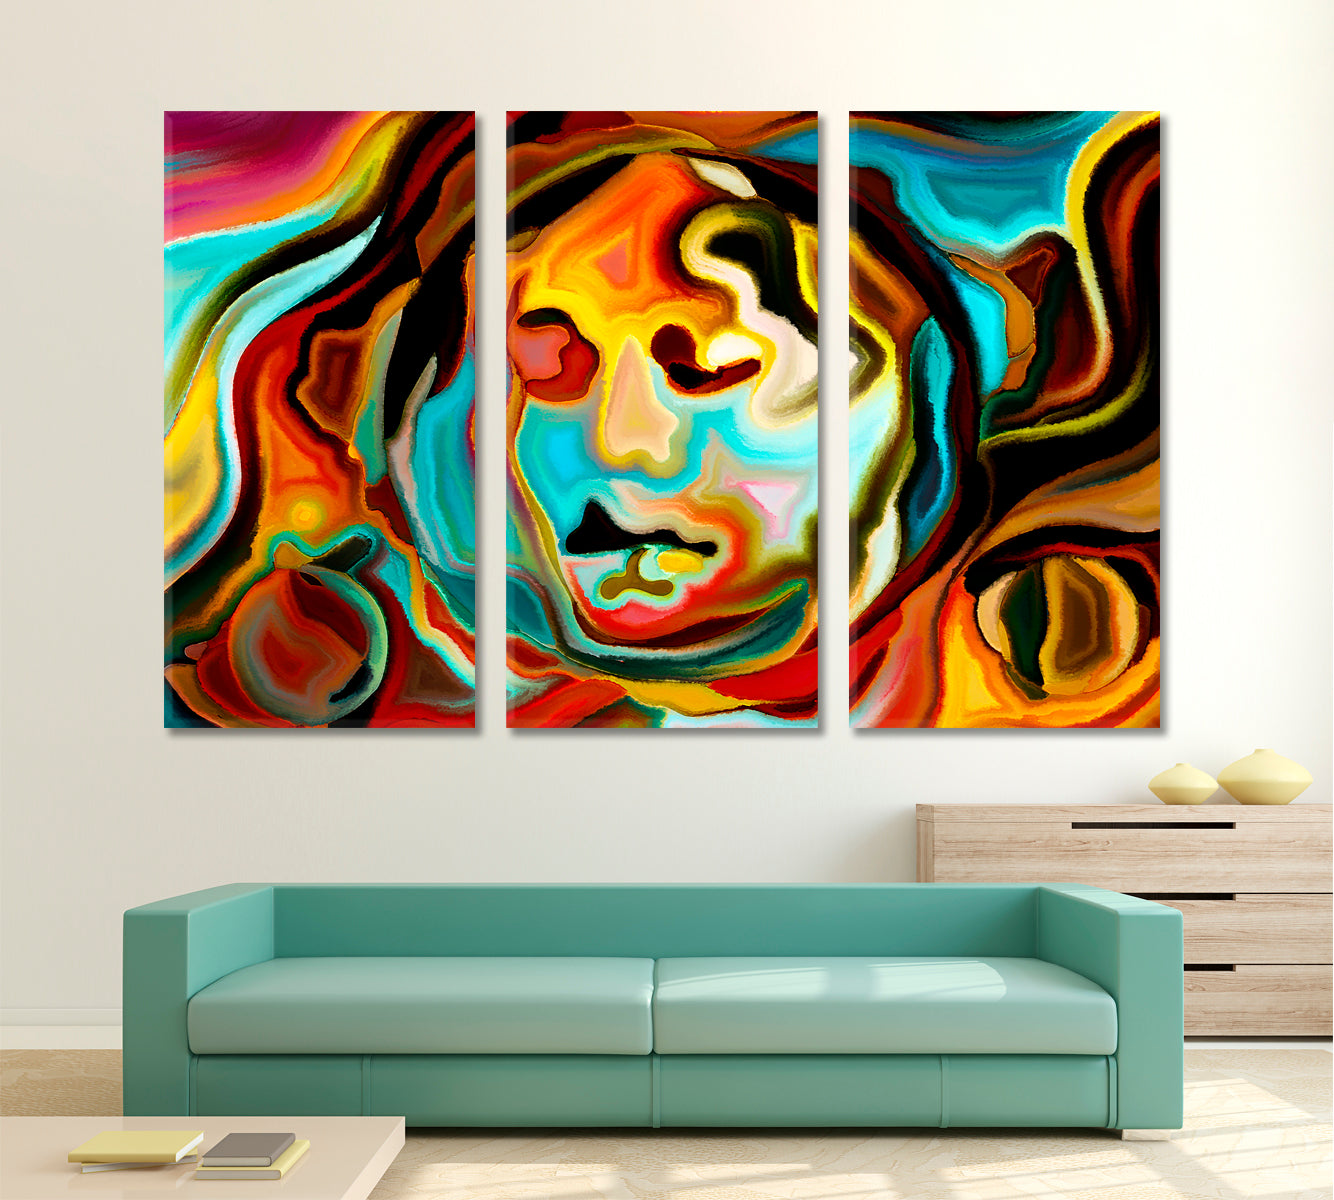 Composition of Human Features, Colors and Abstract Shapes Abstract Art Print Artesty 3 panels 36" x 24" 